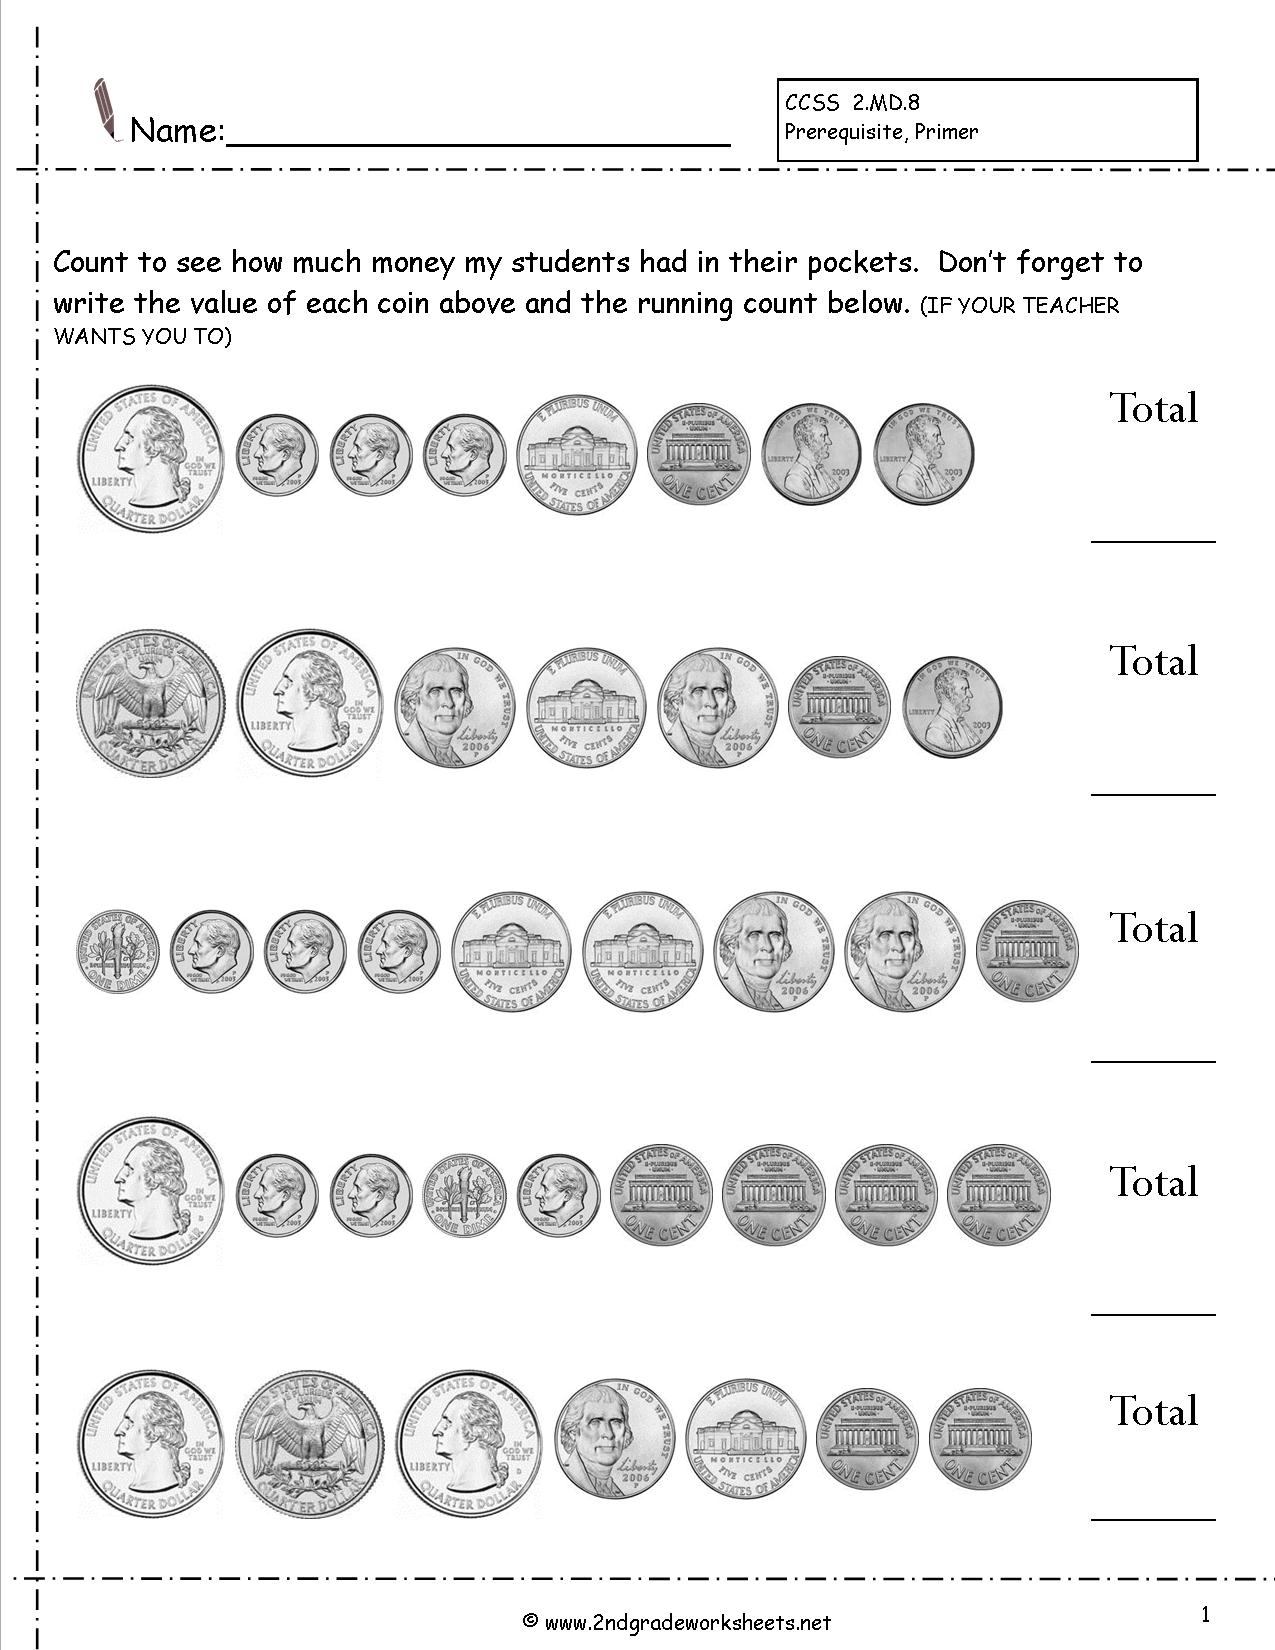 12-best-images-of-counting-money-worksheets-4th-grade-counting-money